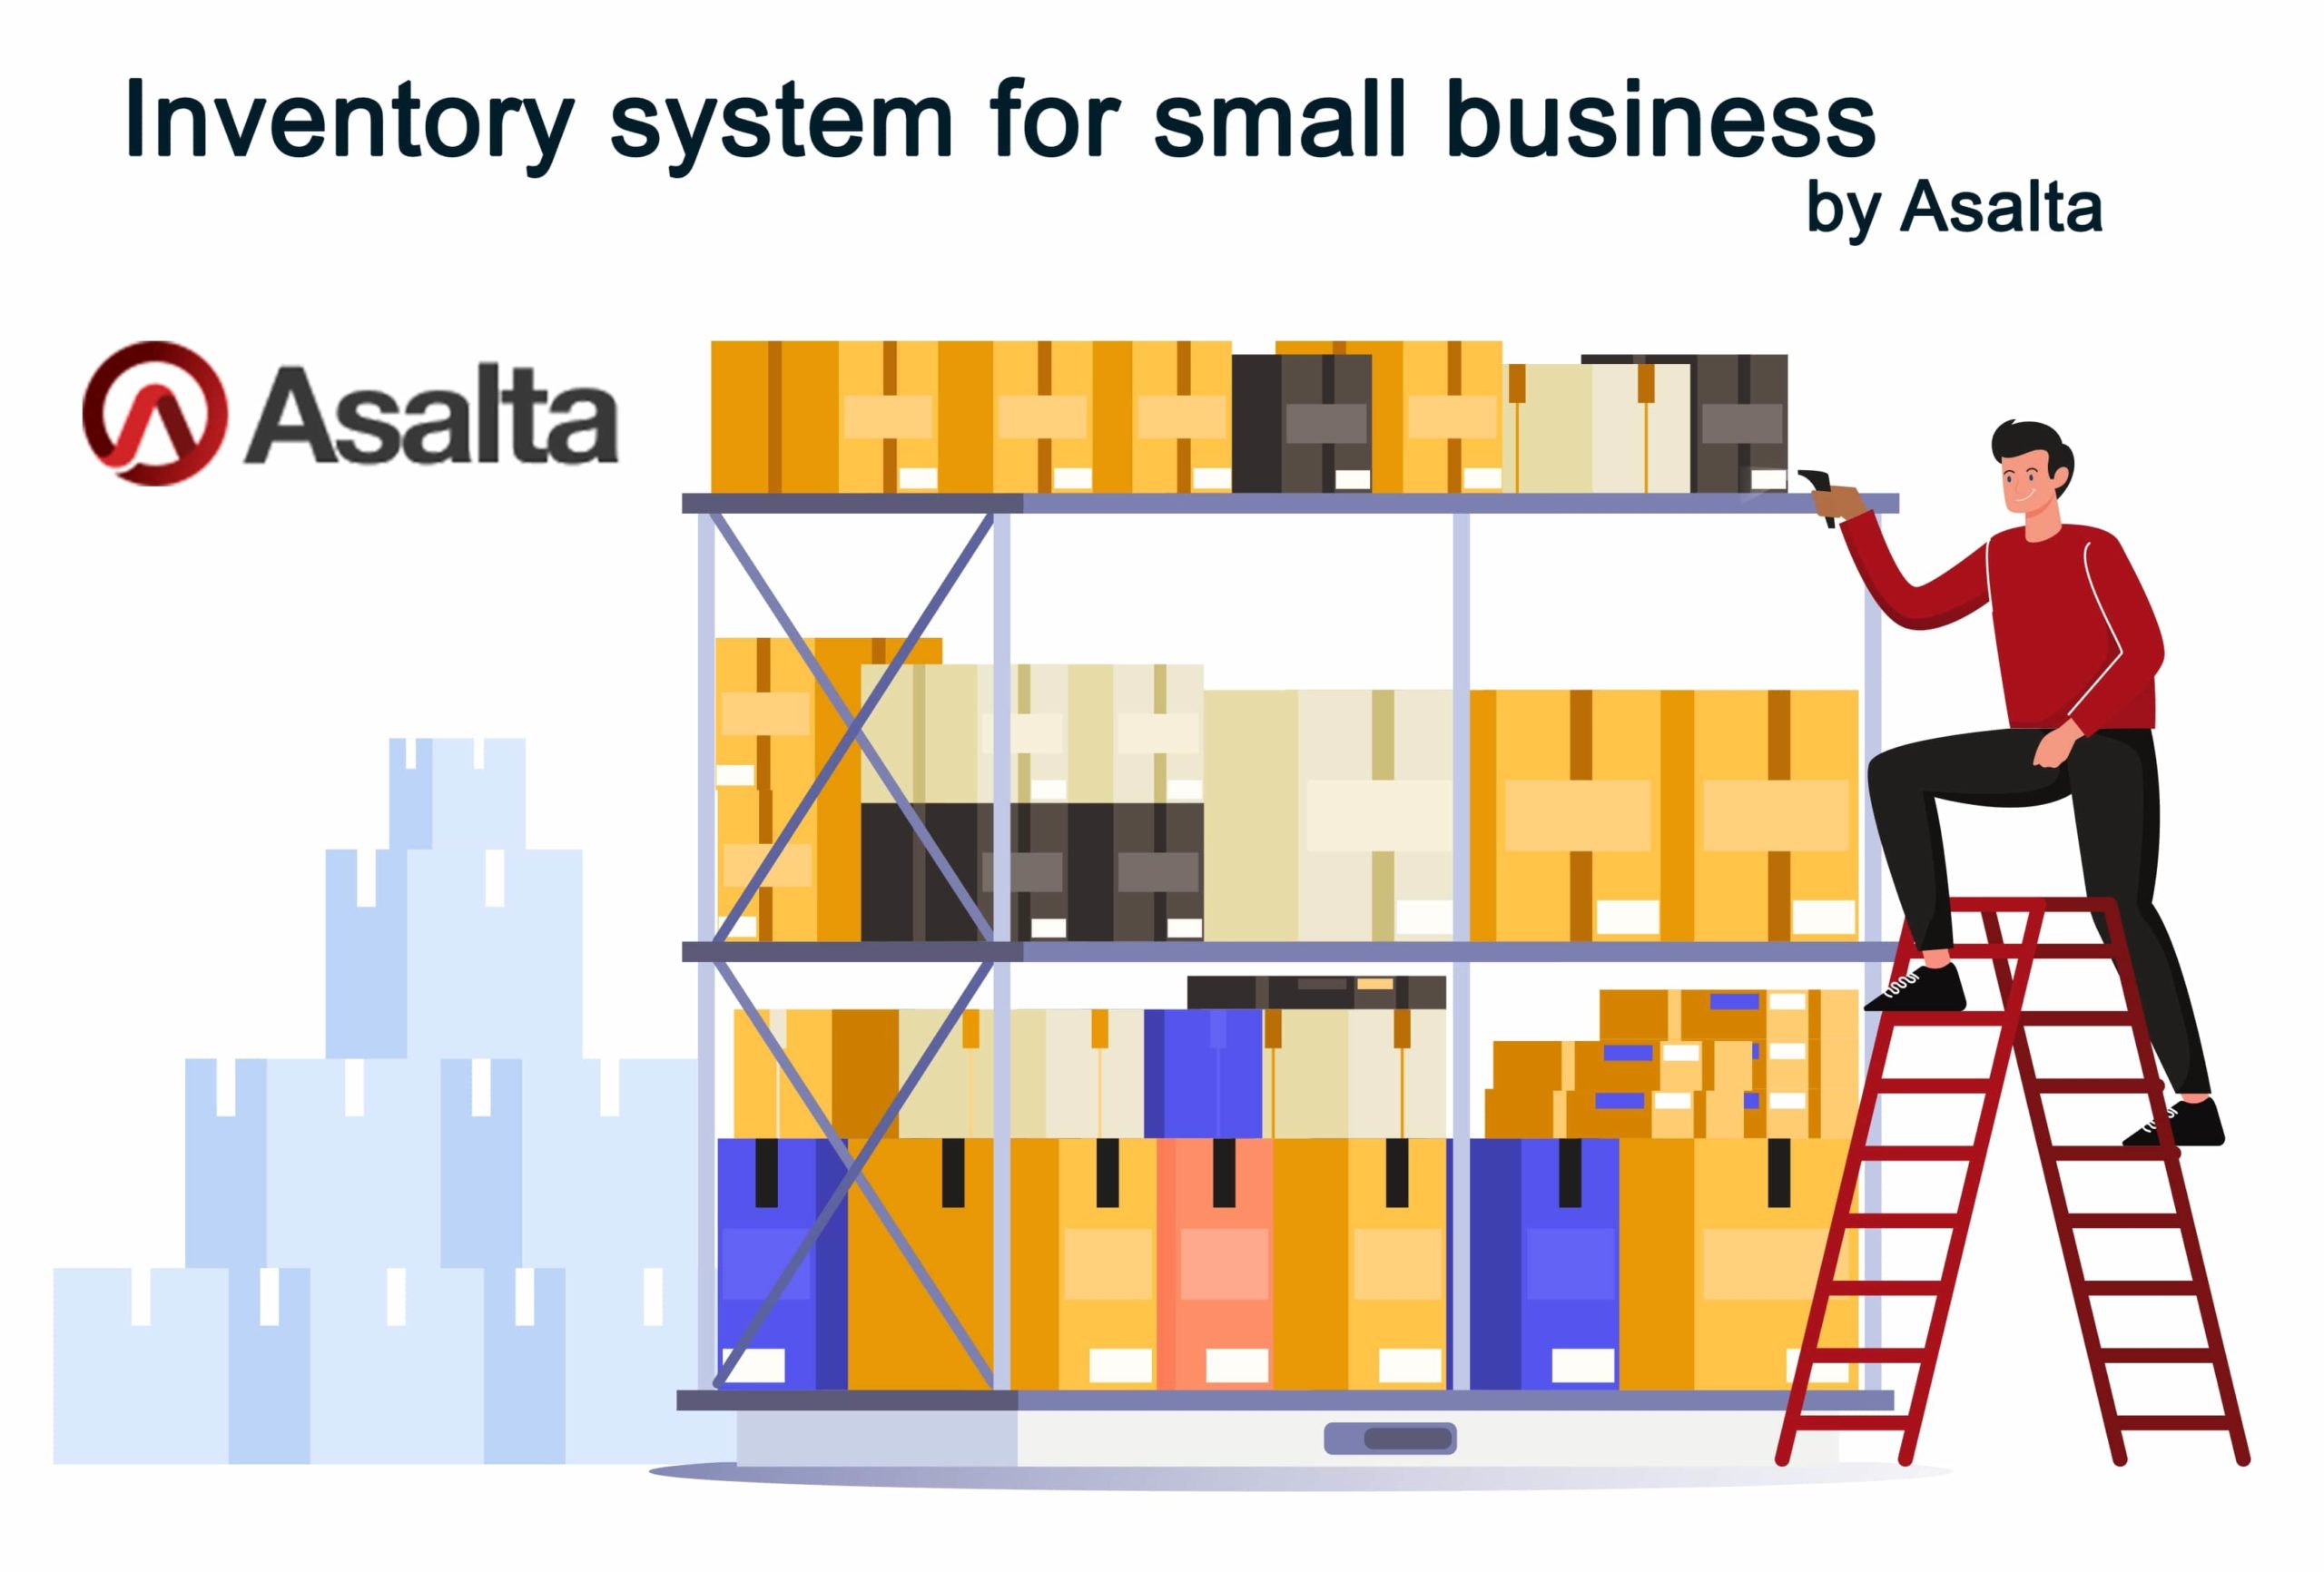 Asalta-Inventory-system-for-small-business